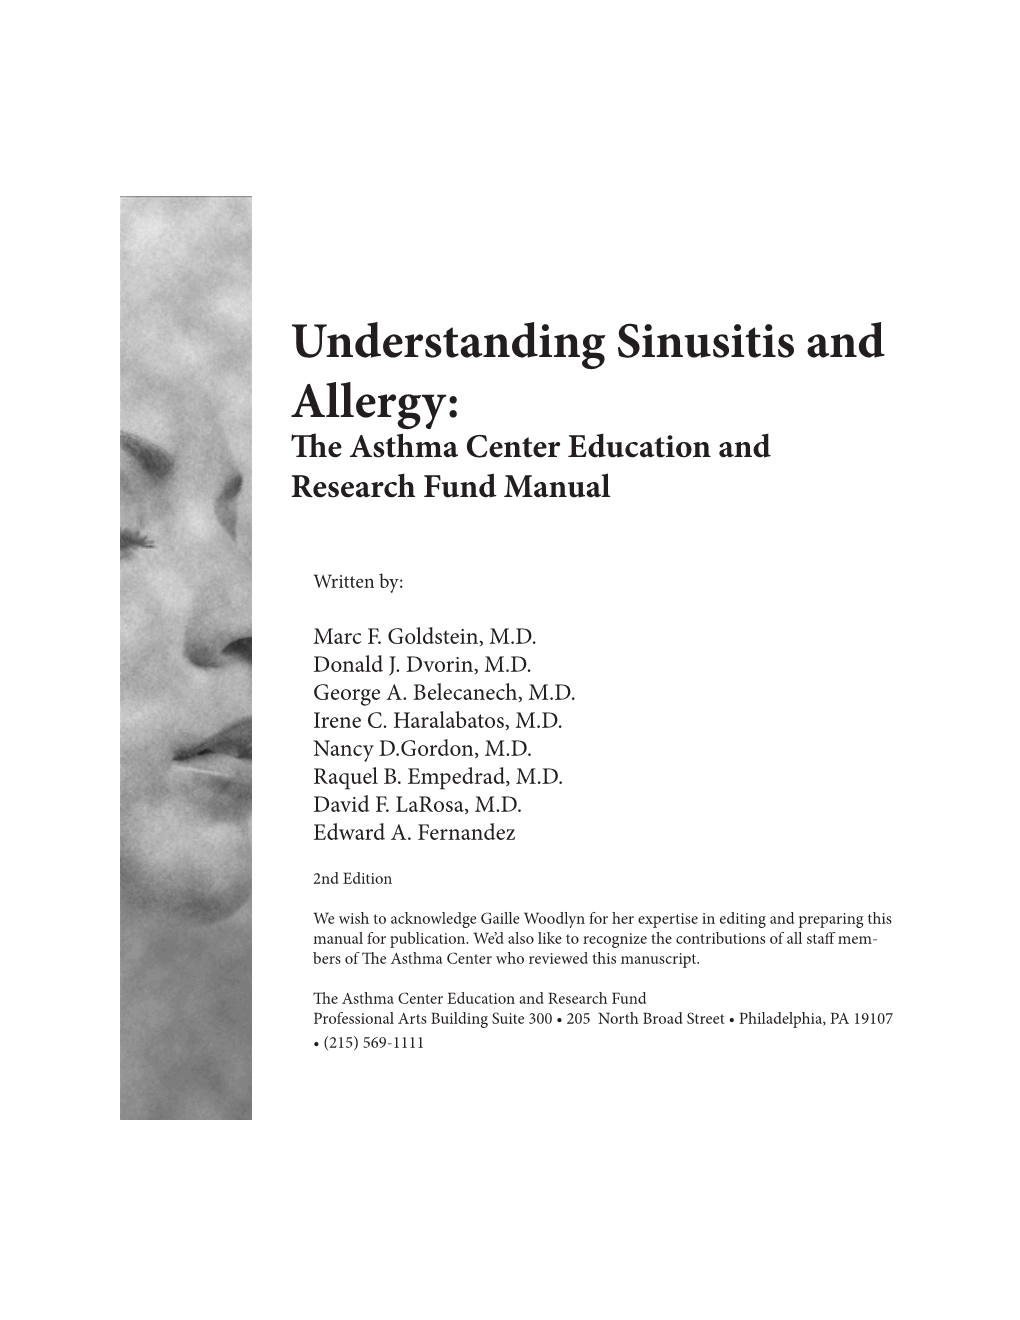 Understanding Sinusitis and Allergy: the Asthma Center Education and Research Fund Manual